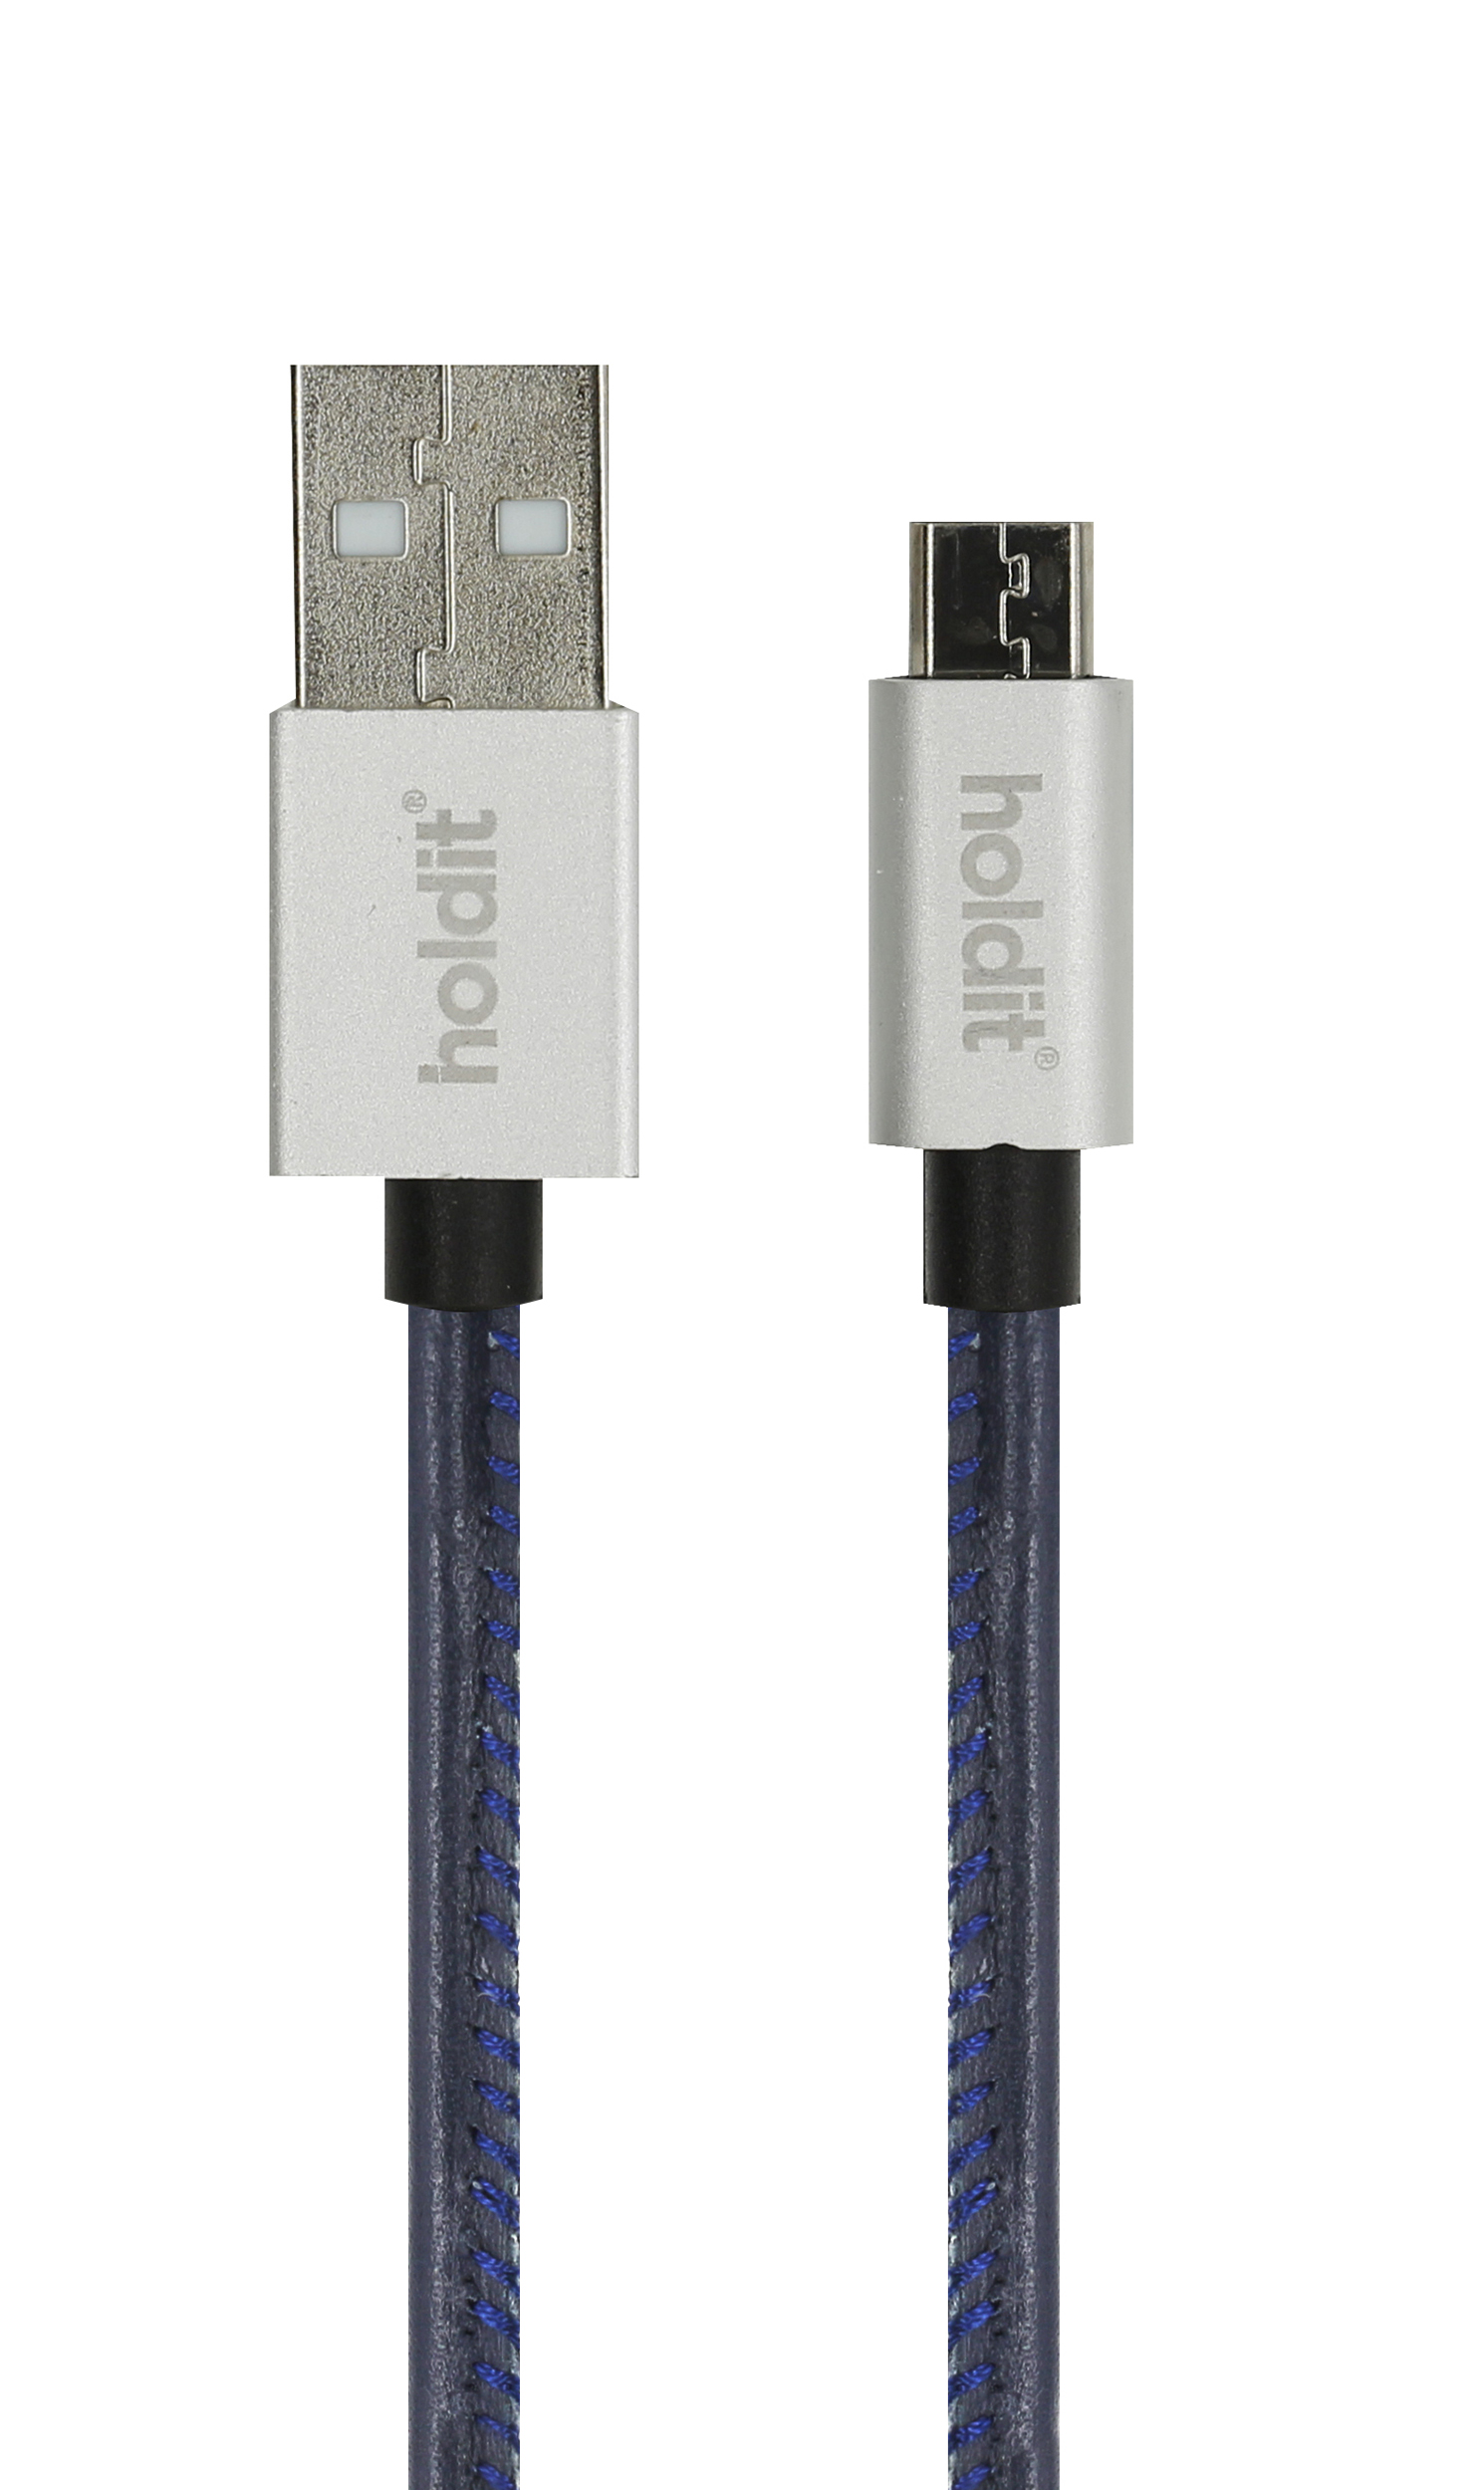 Usb kabel, selected micro-usb 1m, blauw/zilver